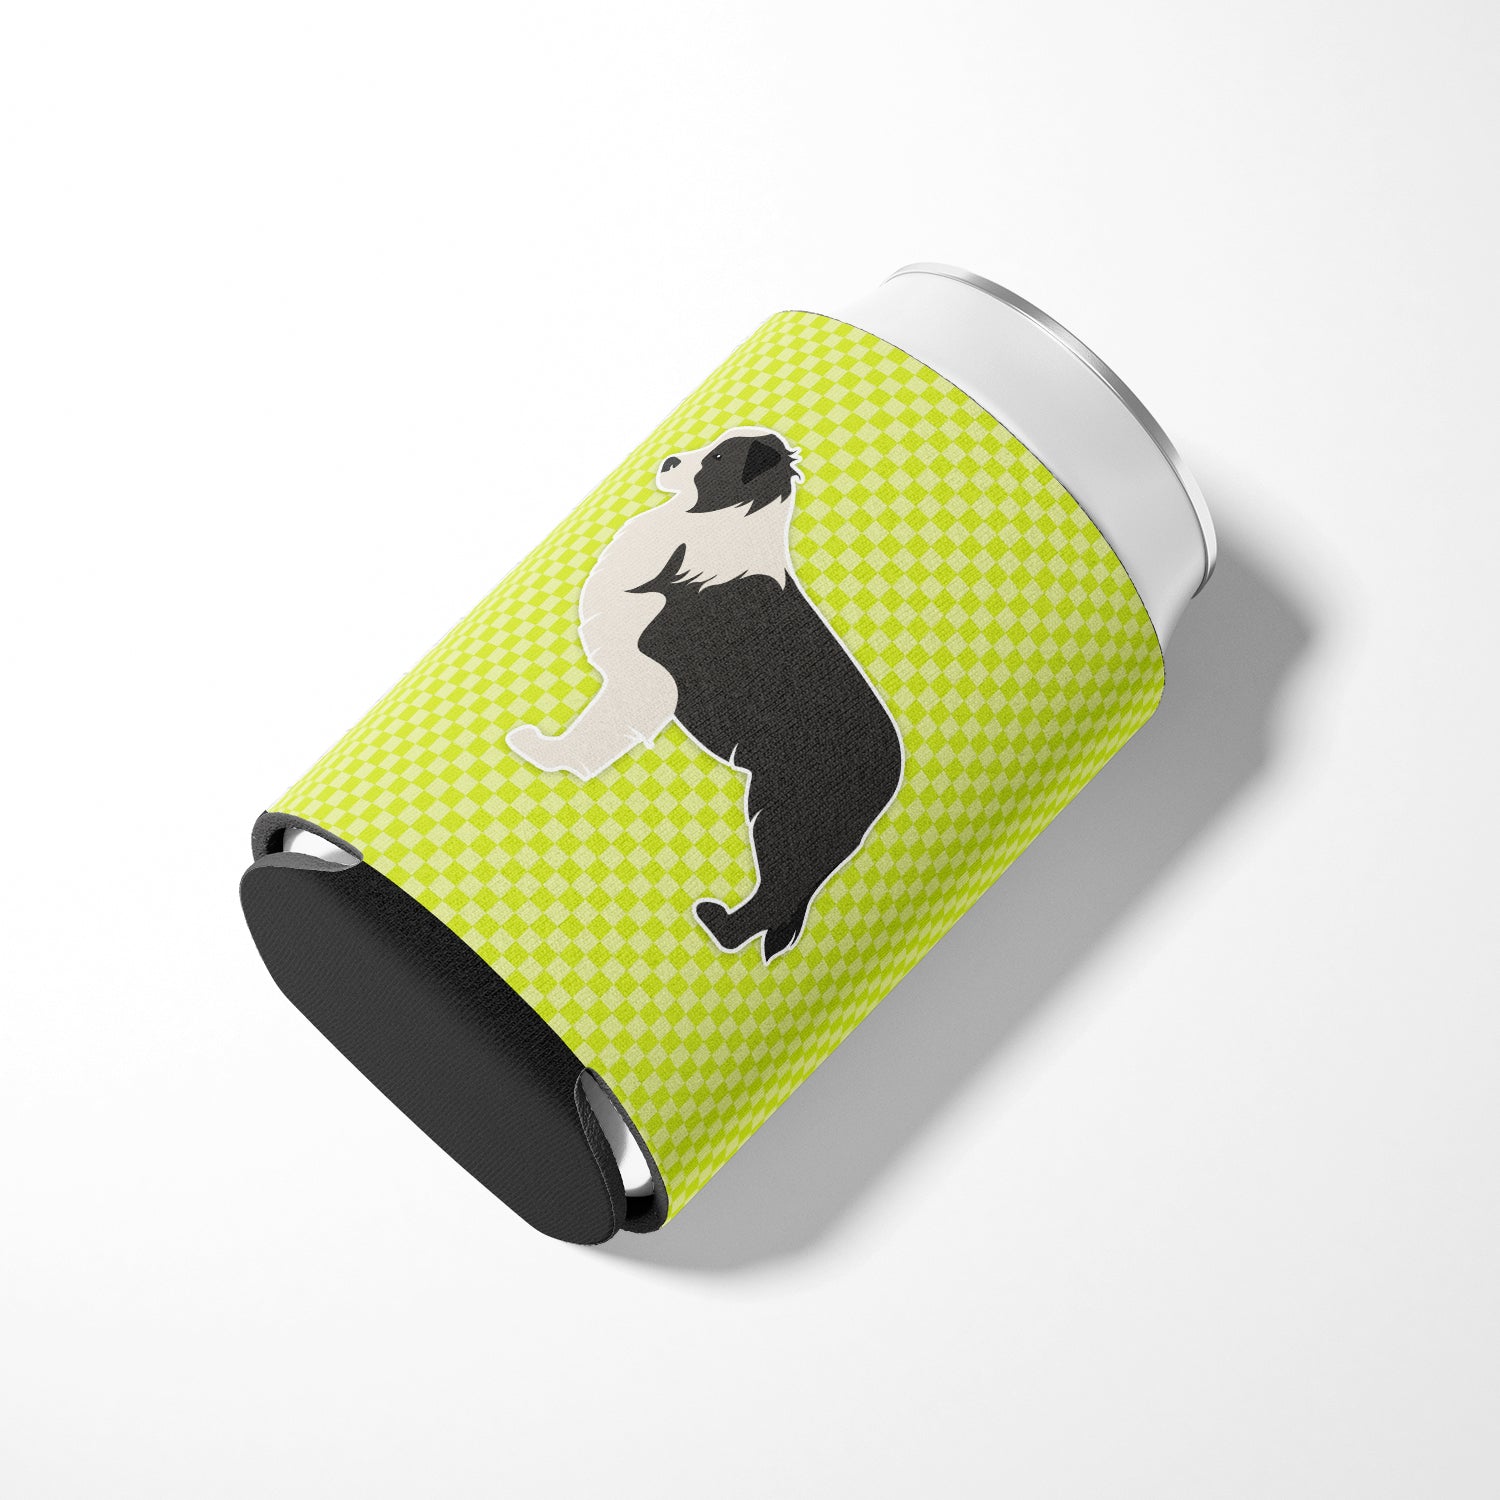 Black Border Collie Checkerboard Green Can or Bottle Hugger BB3823CC  the-store.com.